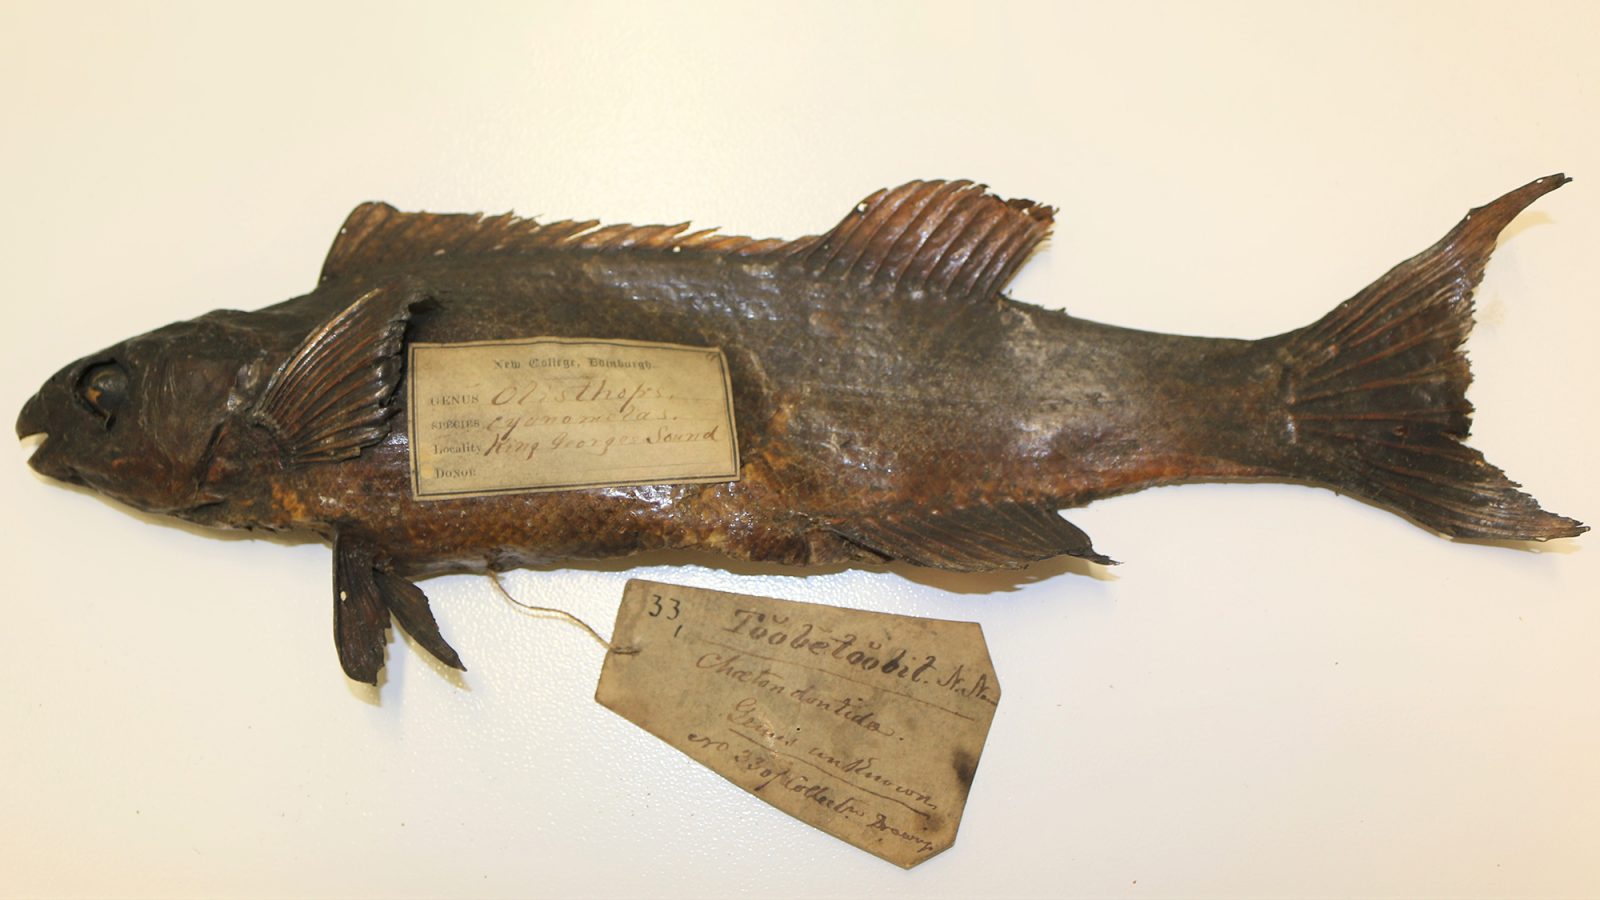 A taxidermy prep of a fish with labels attached to its fins.